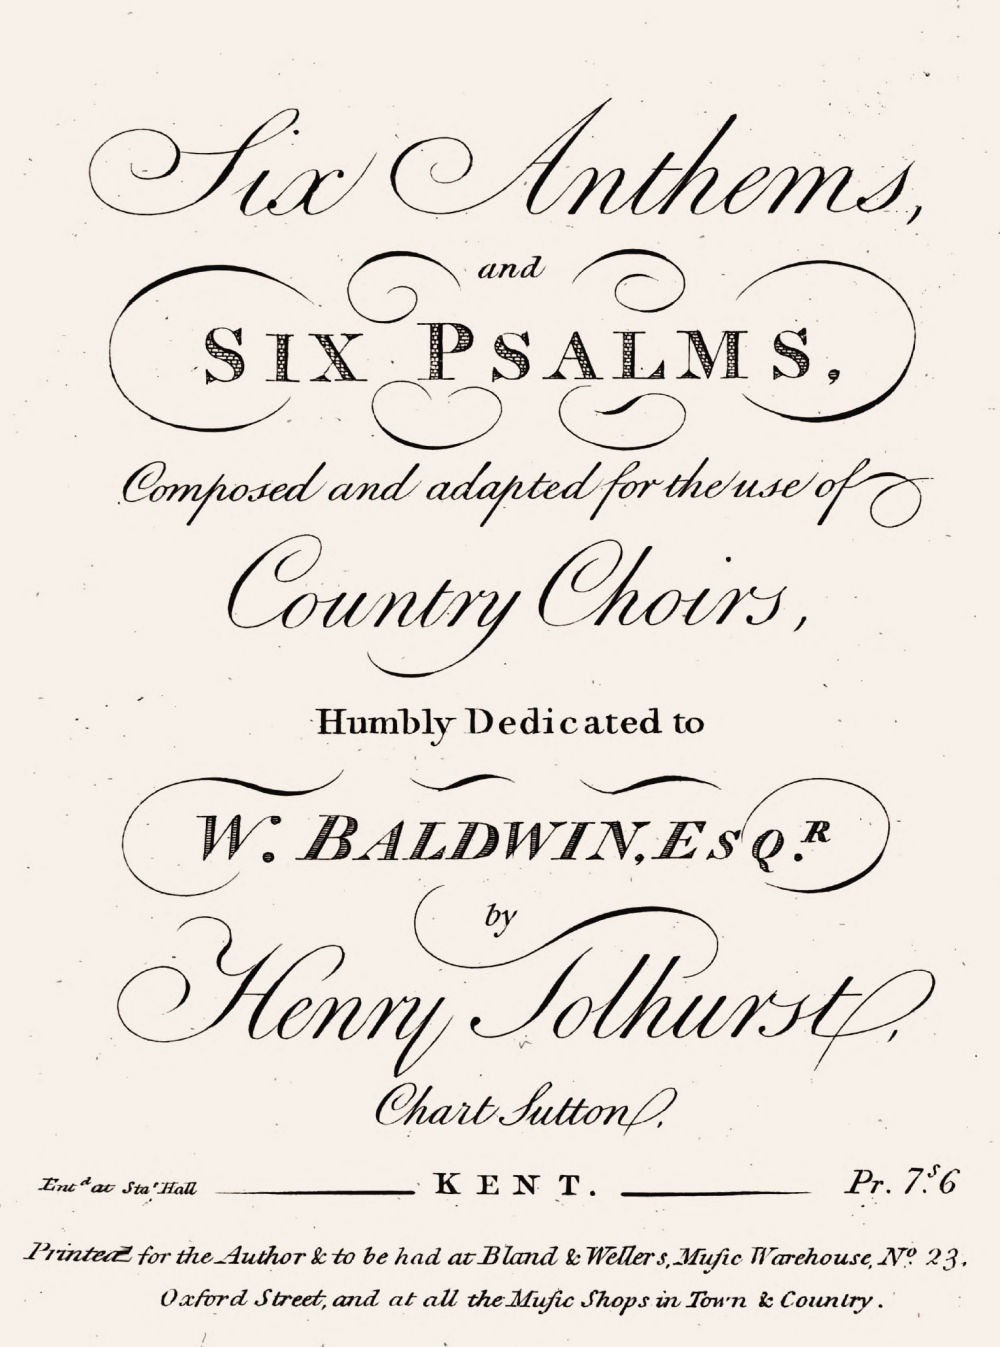 Titlepage of Six anthems, and six psalms, by Henry Tolhurst, 1802